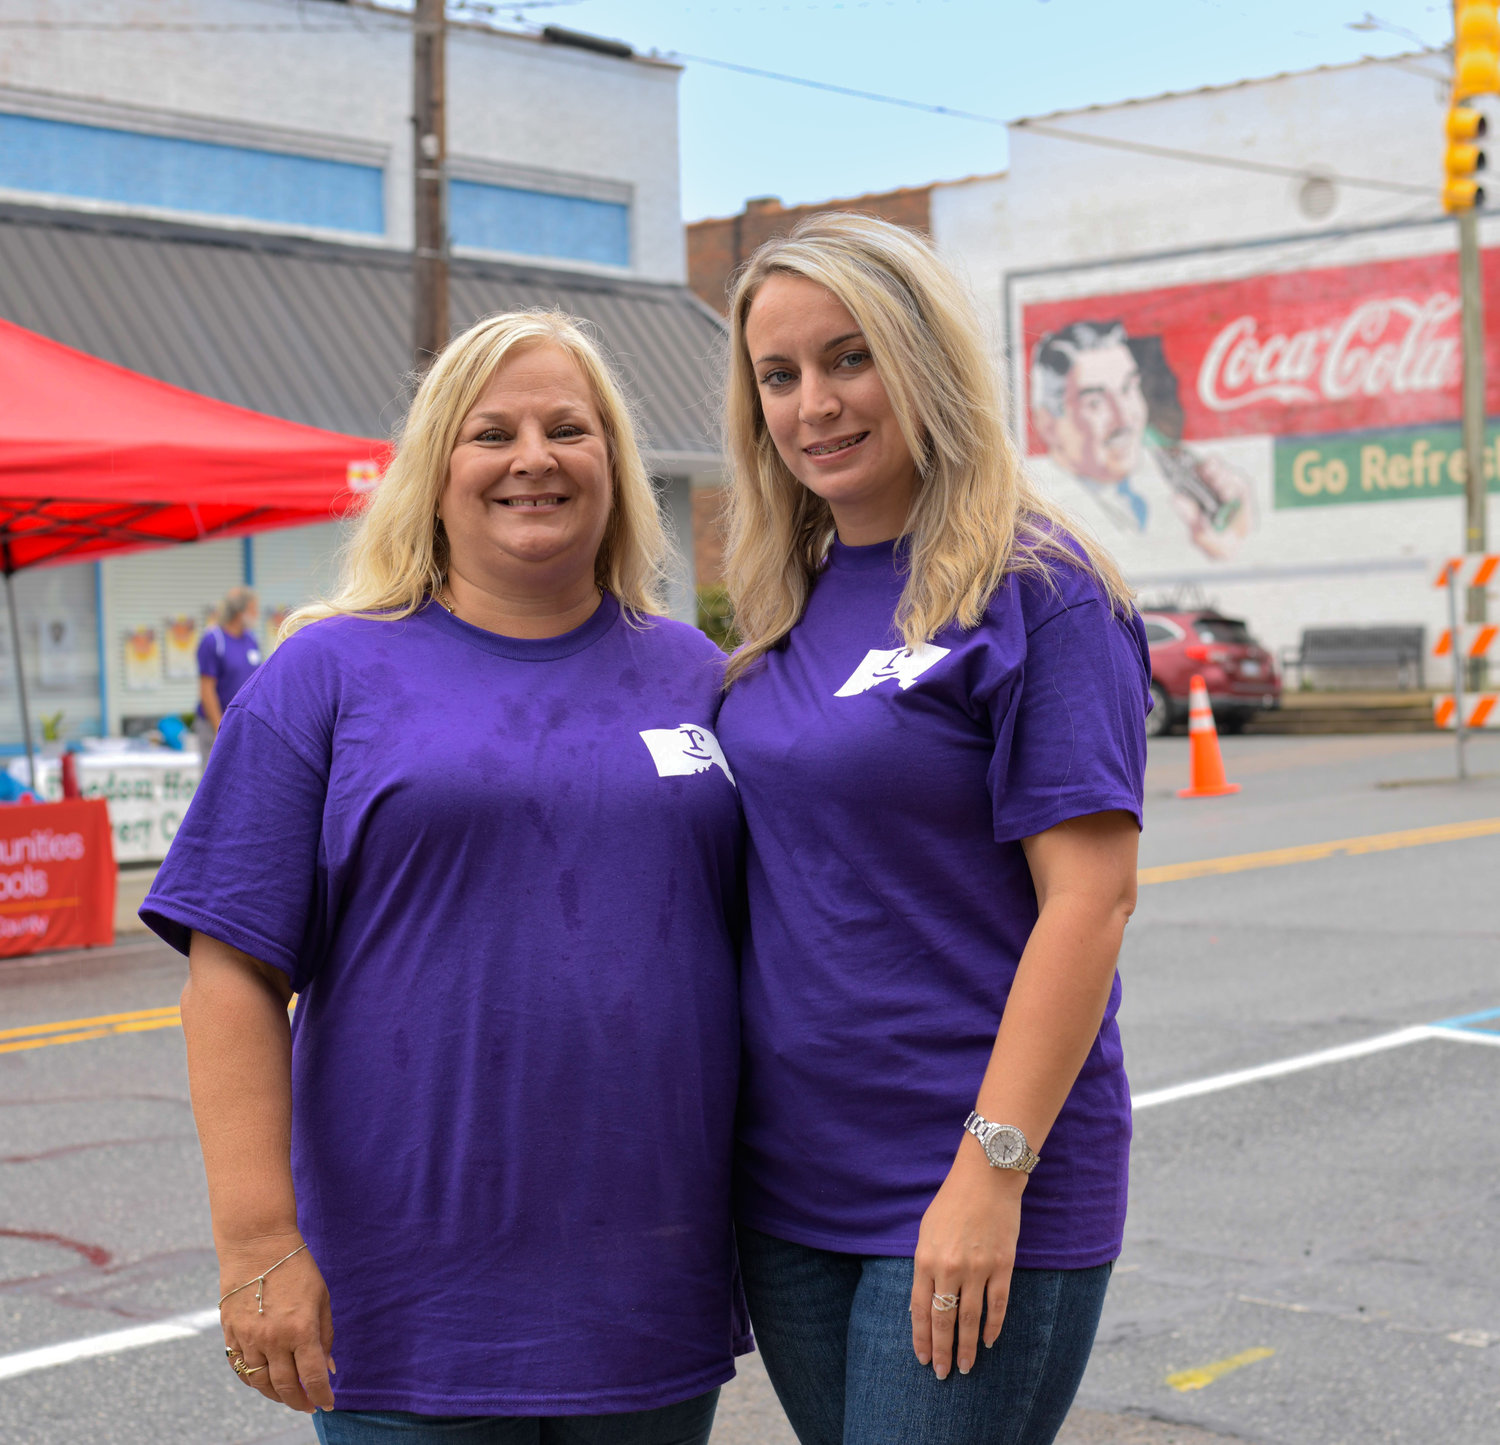 Barbara Berry (left) poses with her daughter Ashley Walters at Chatham County Drug Recovery Celebration in downtown Siler City on Saturday. Berry is approaching the five-year sober mark from her addiction to methamphetamines.